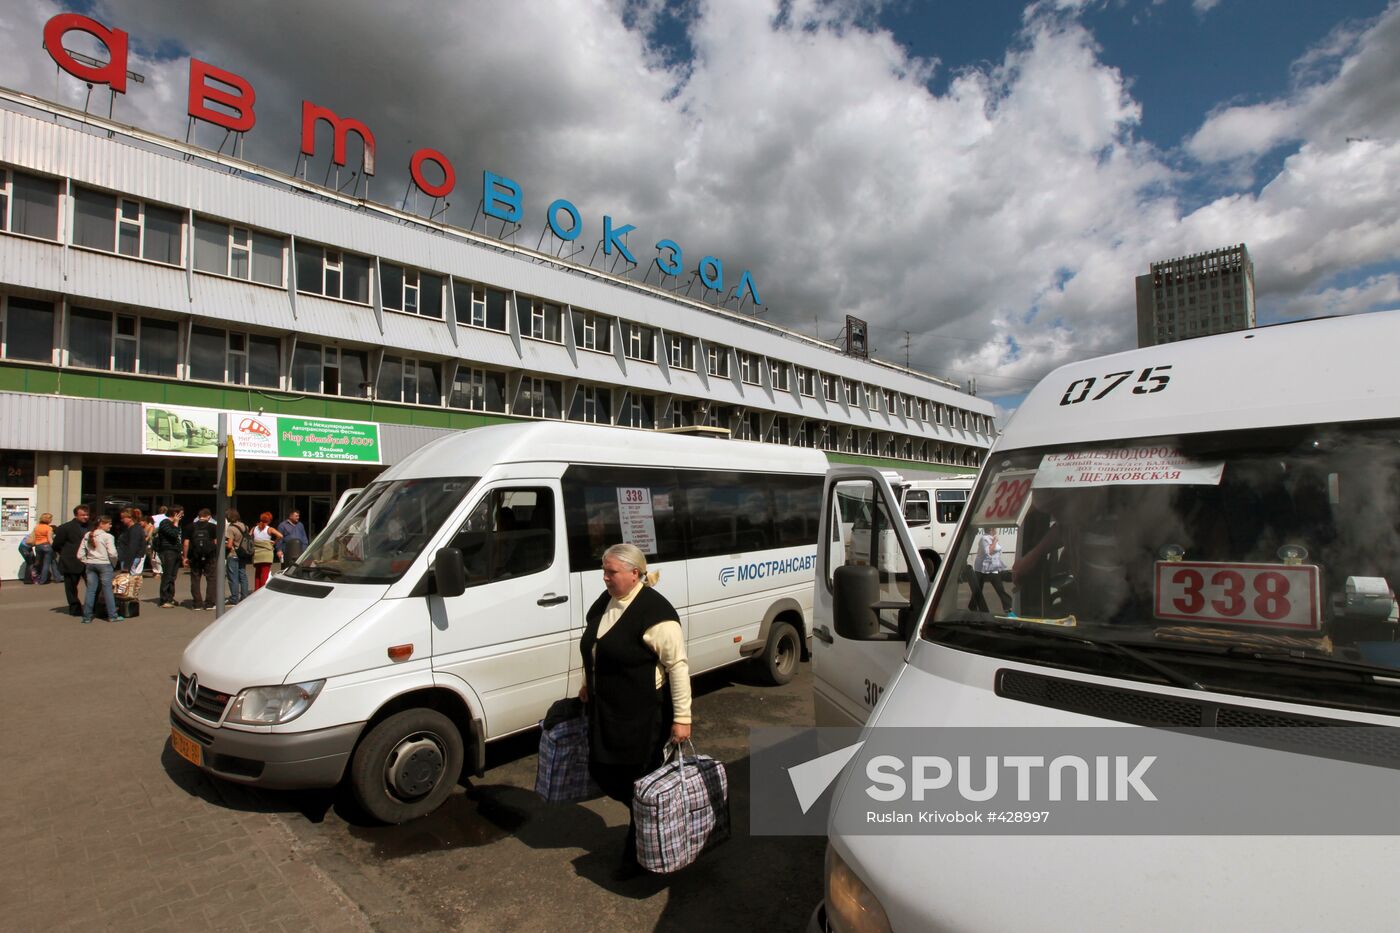 Moscow Central Bus Station